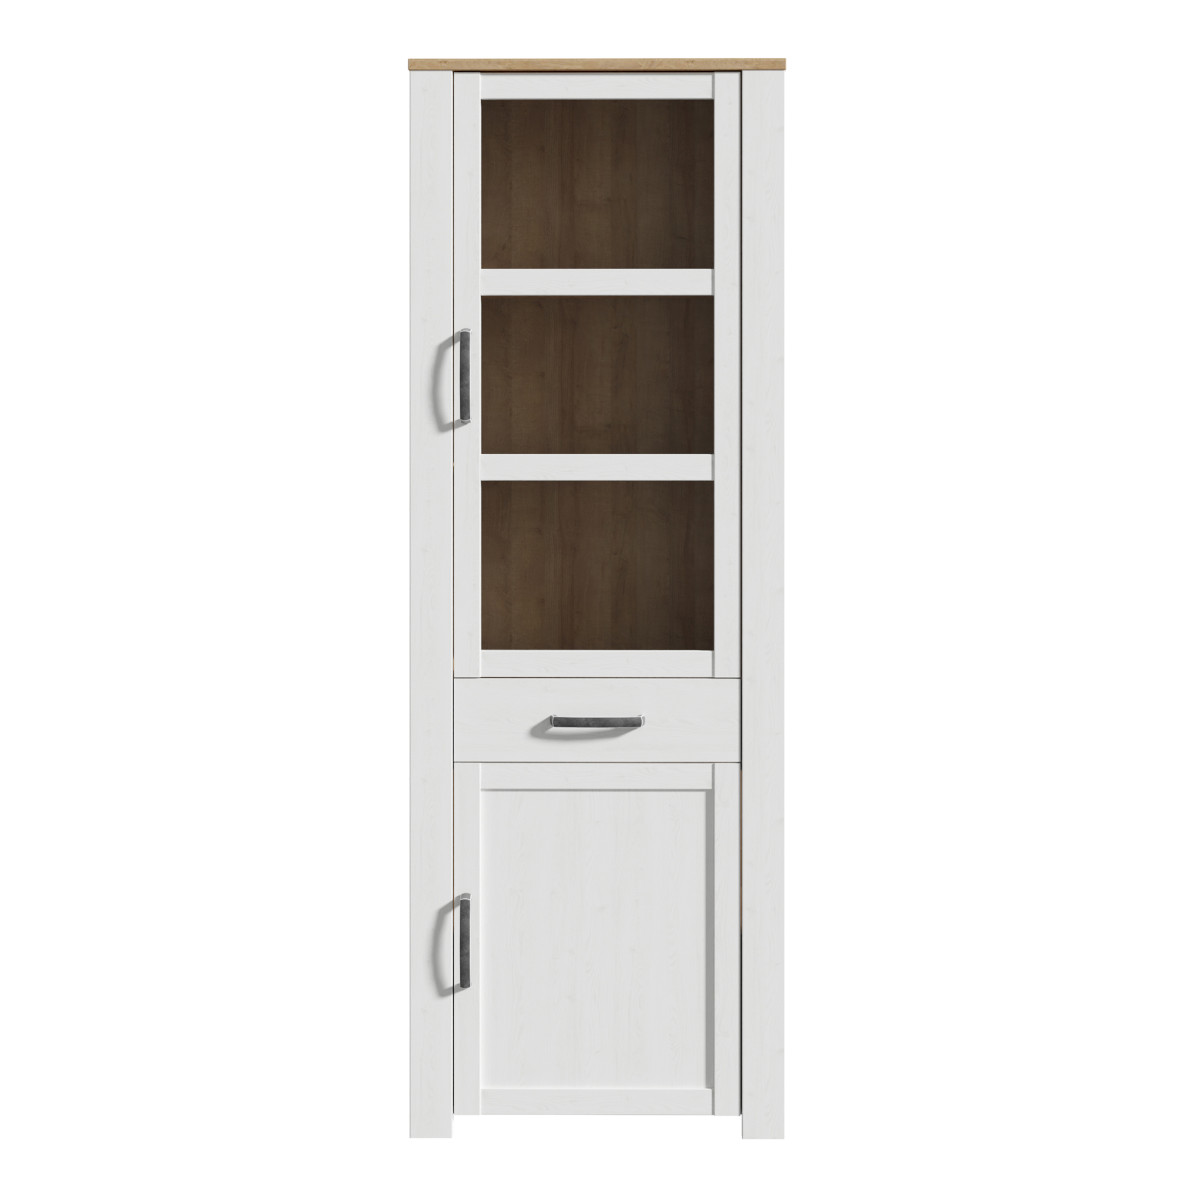 Bohol Narrow Display Cabinet in Riviera Oak and White